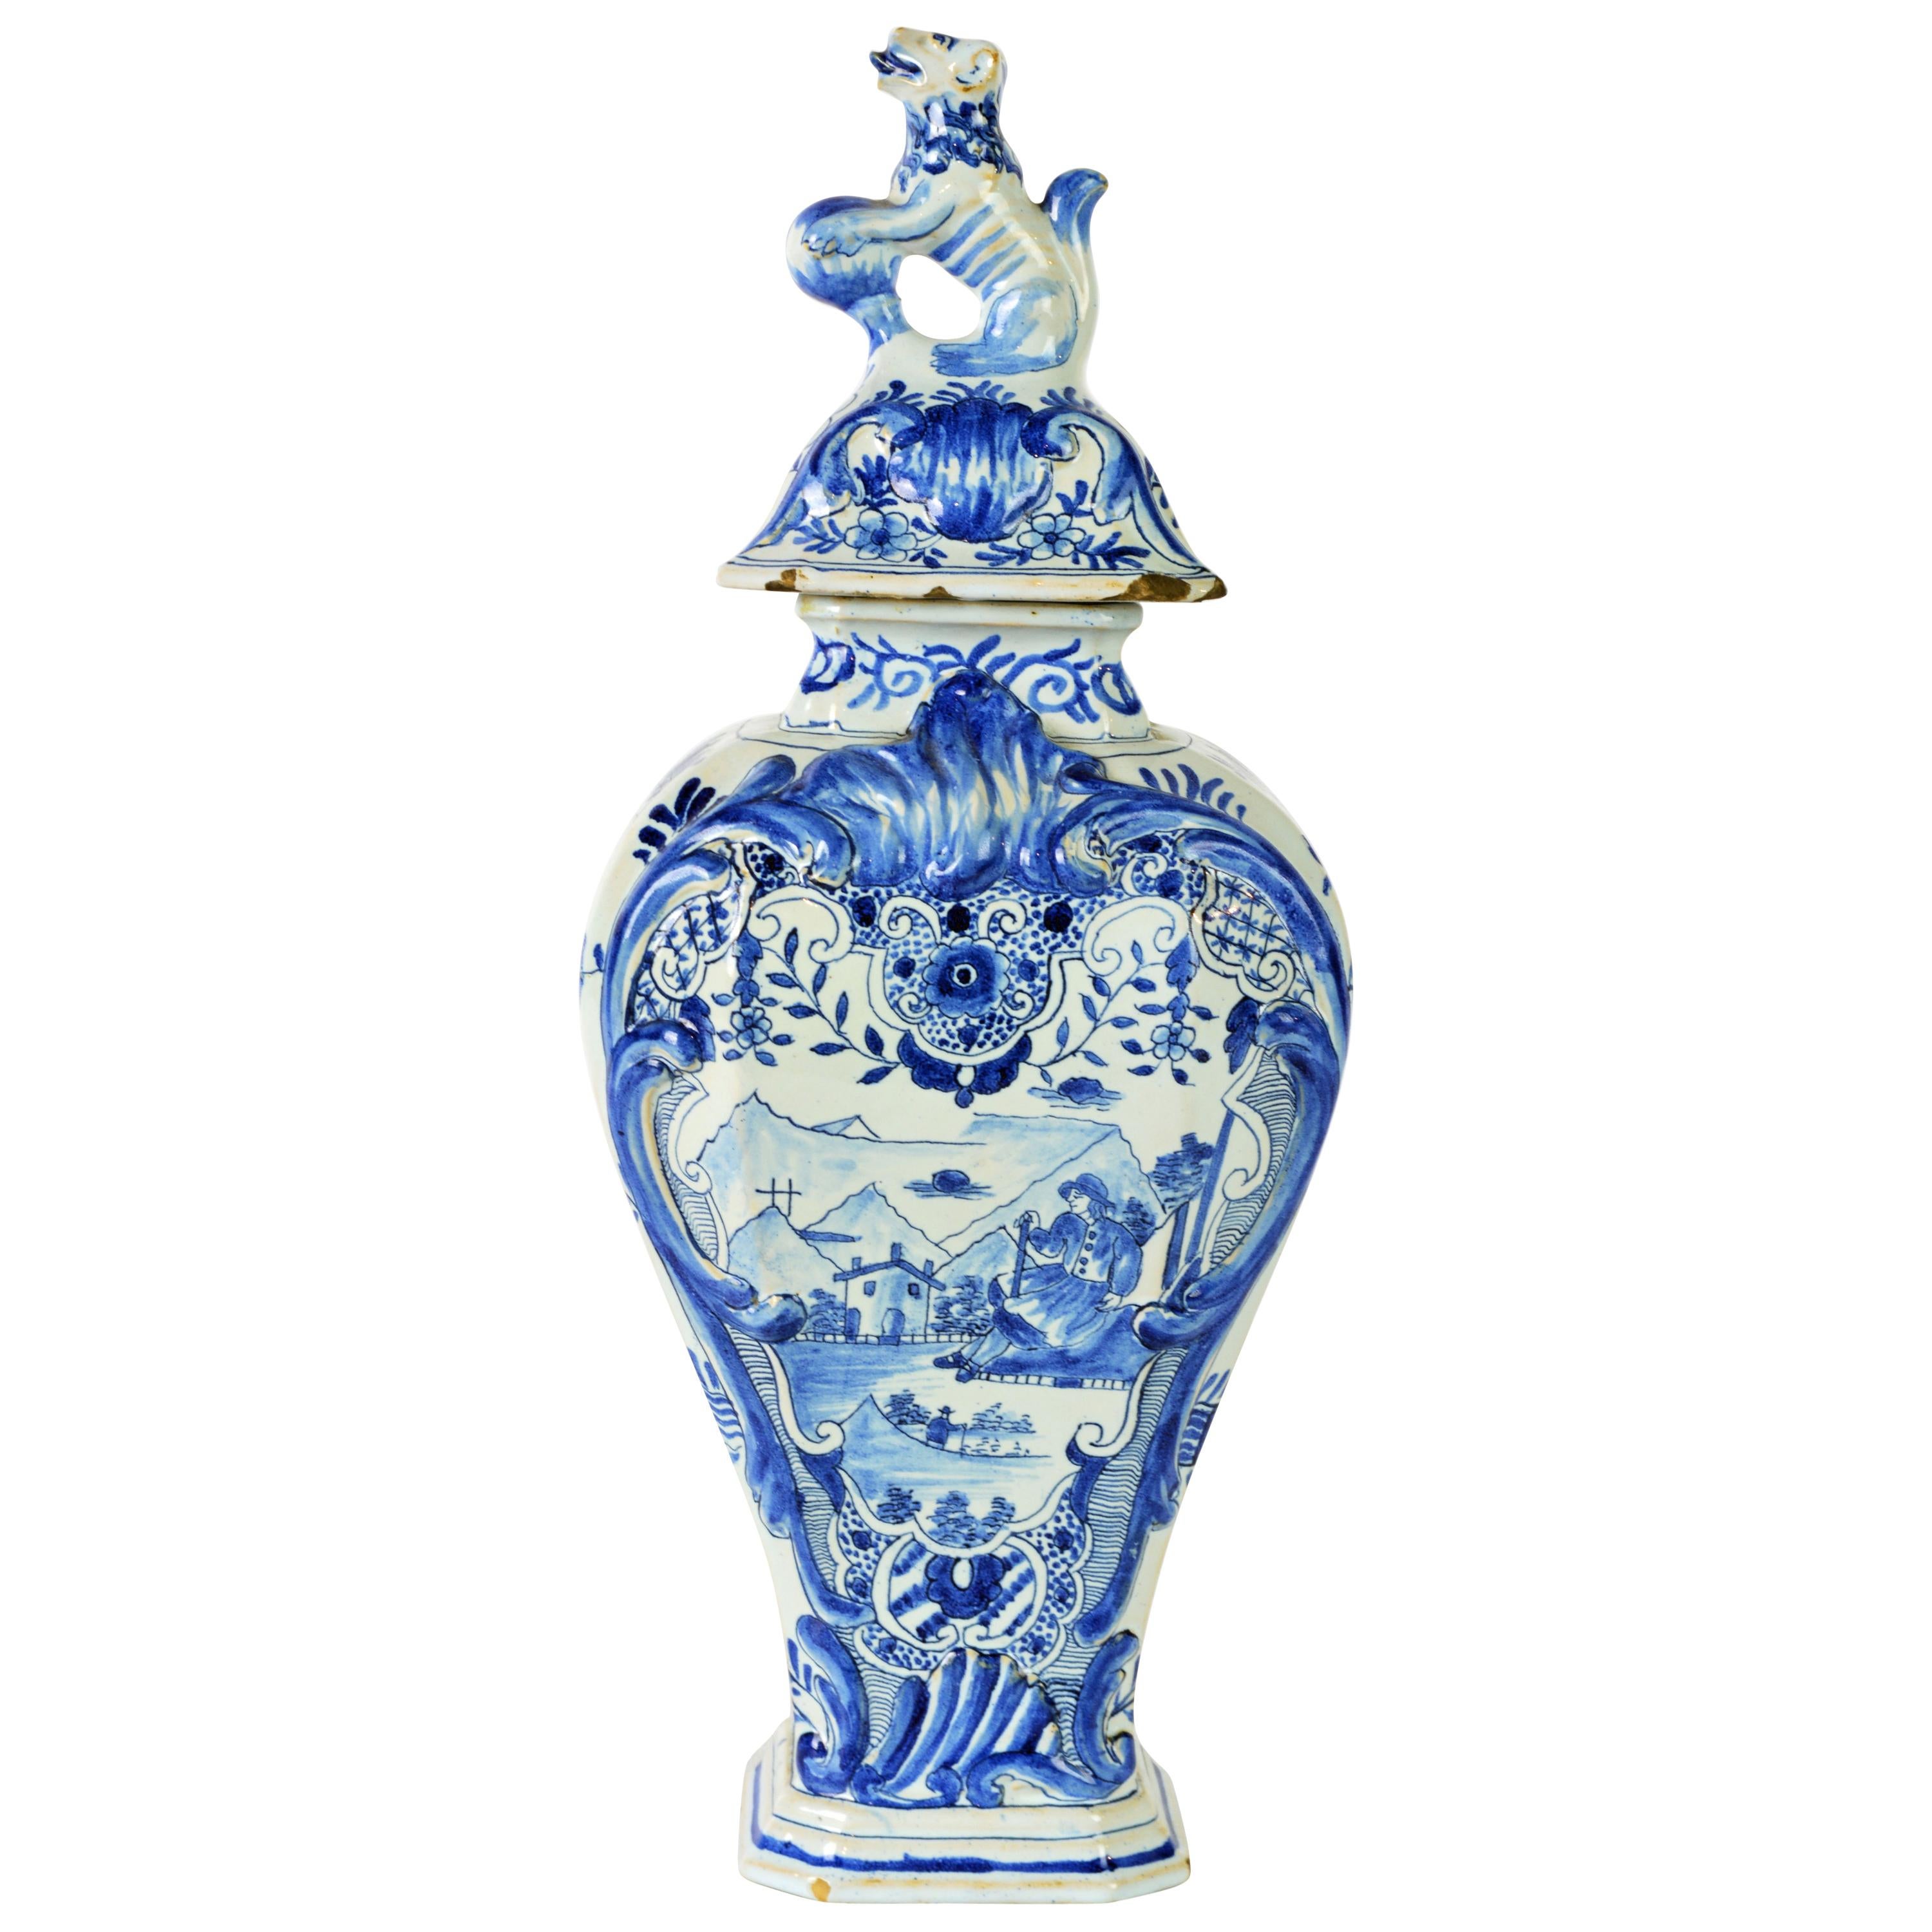 Blue and White 18th Century Delft Pottery Covered Octagonal Jar with Lion Finial